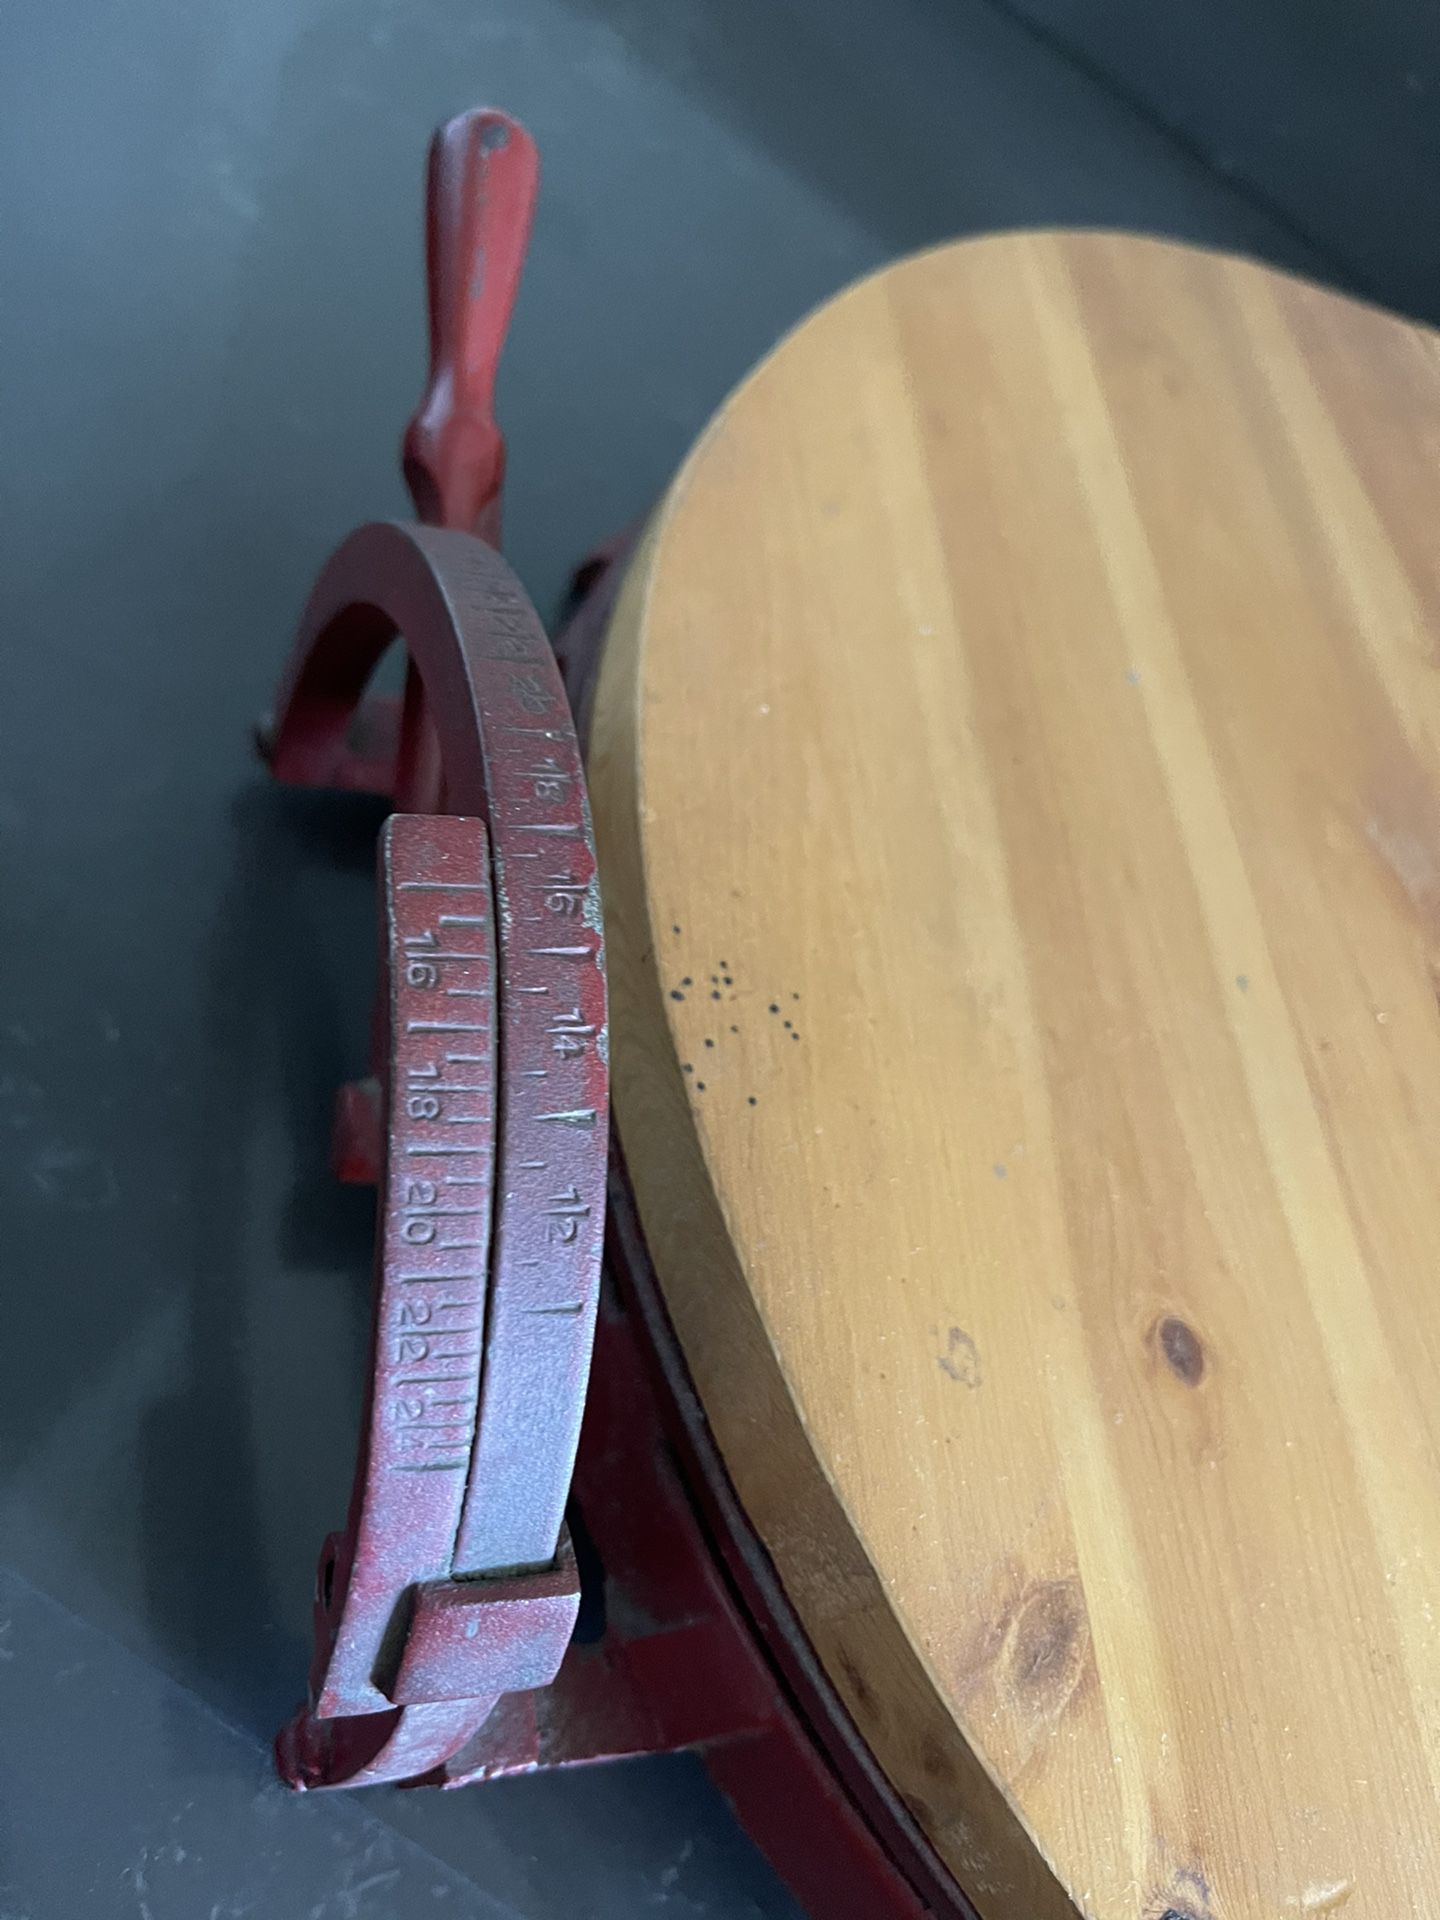 Antique Cheese Cutter Used In Old General Stores To Cut Wheels Of Cheese  for Sale in Vancouver, WA - OfferUp